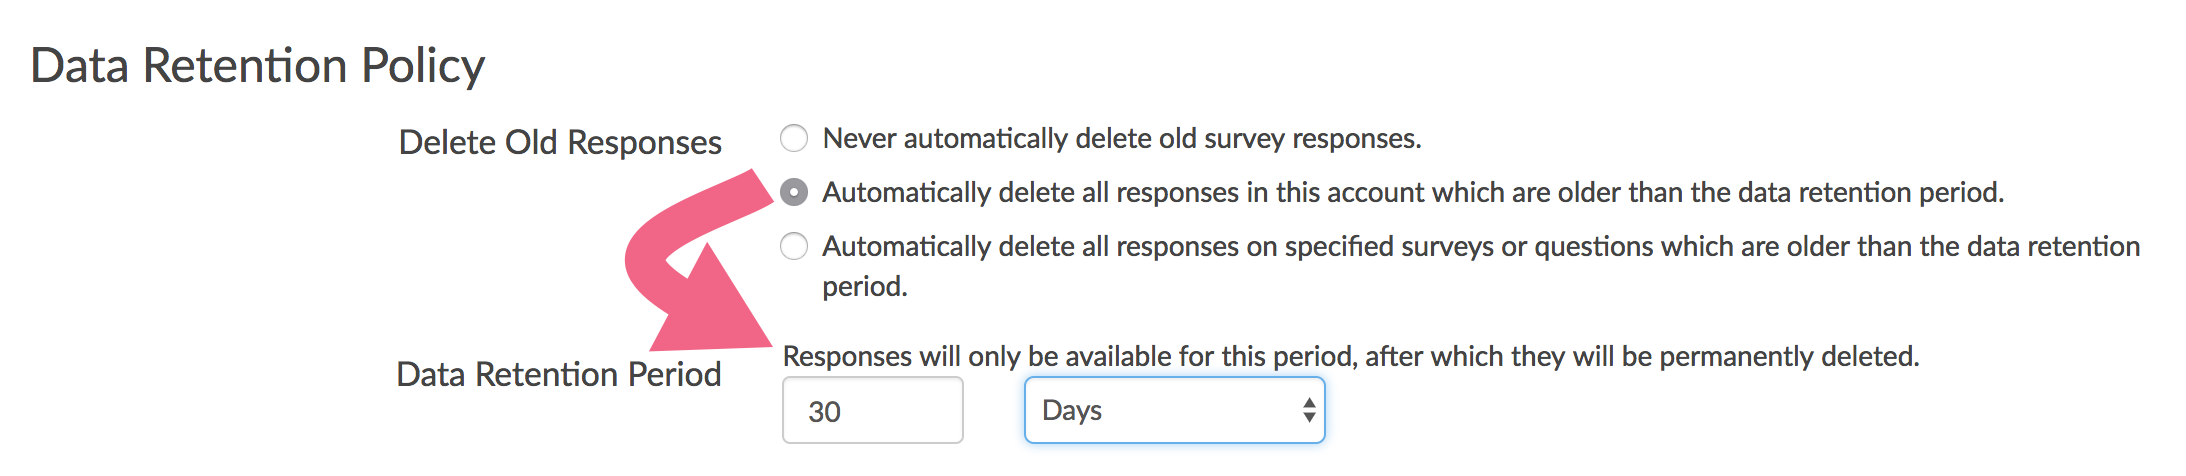 DRP Setting: Automatically delete responses older than the data retention period